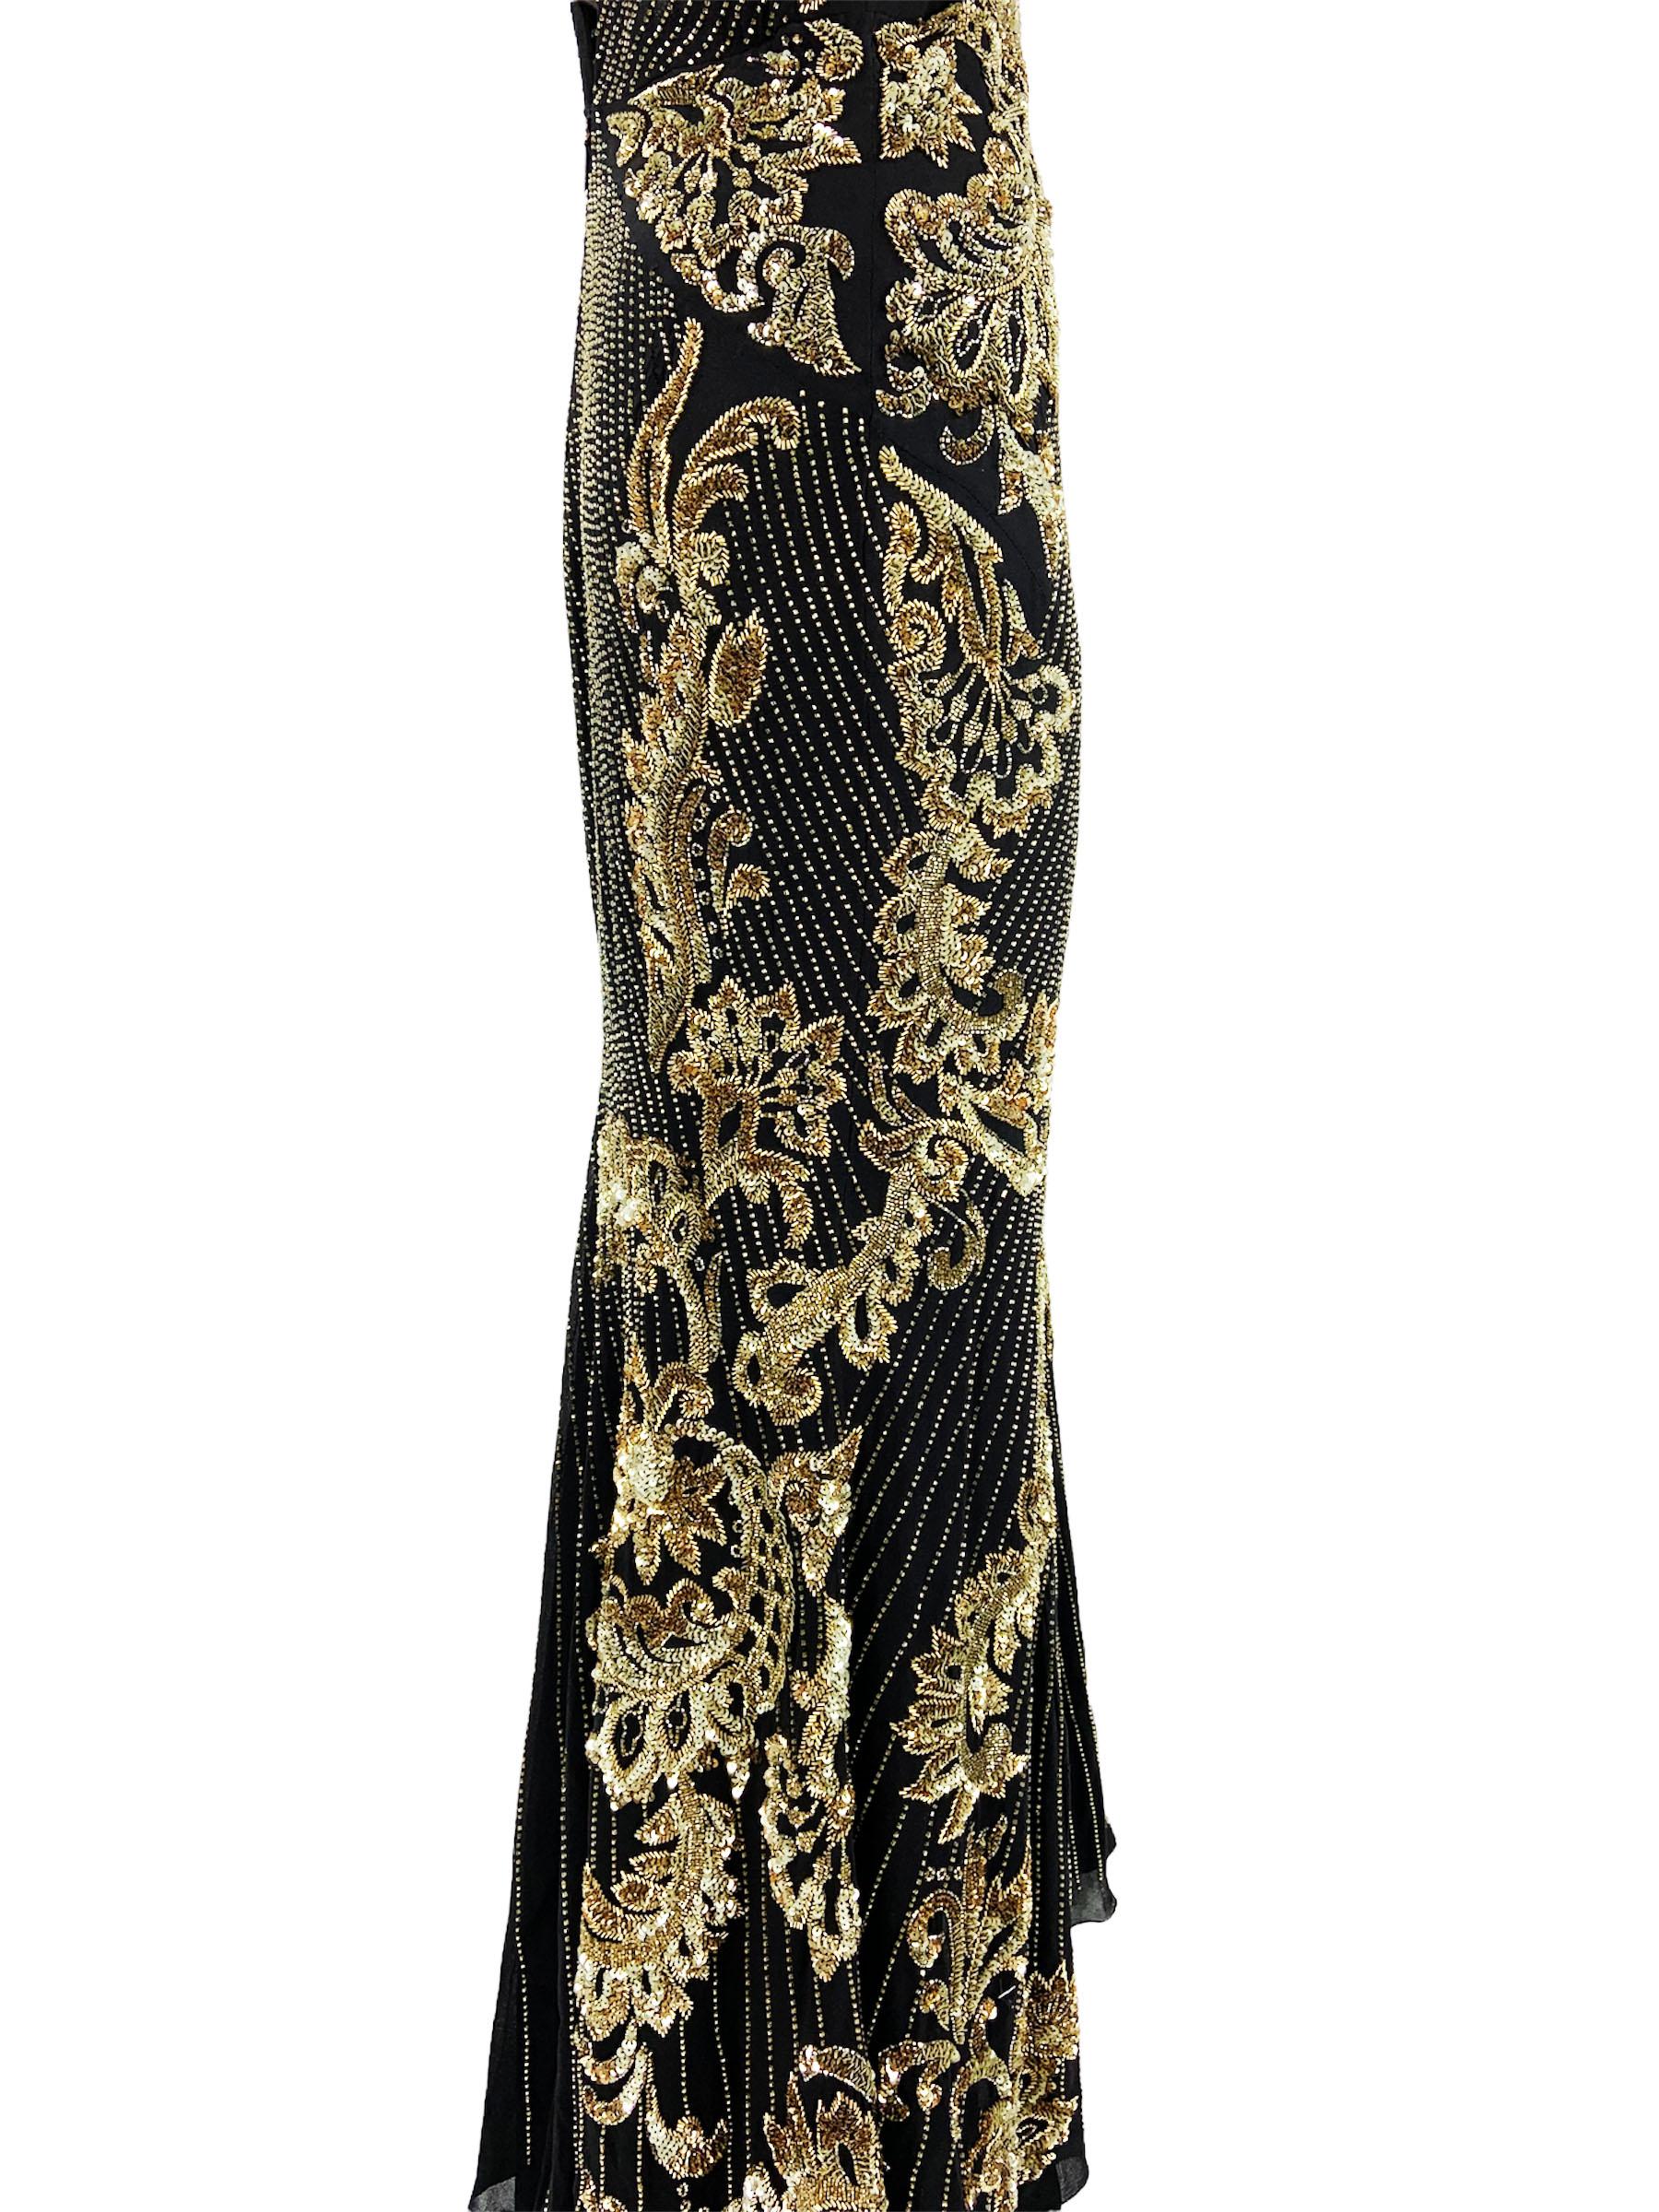 NWT $9.990 Roberto Cavalli Black Silk Fully Embellished Dress Gown  It 42 - US 6 For Sale 5